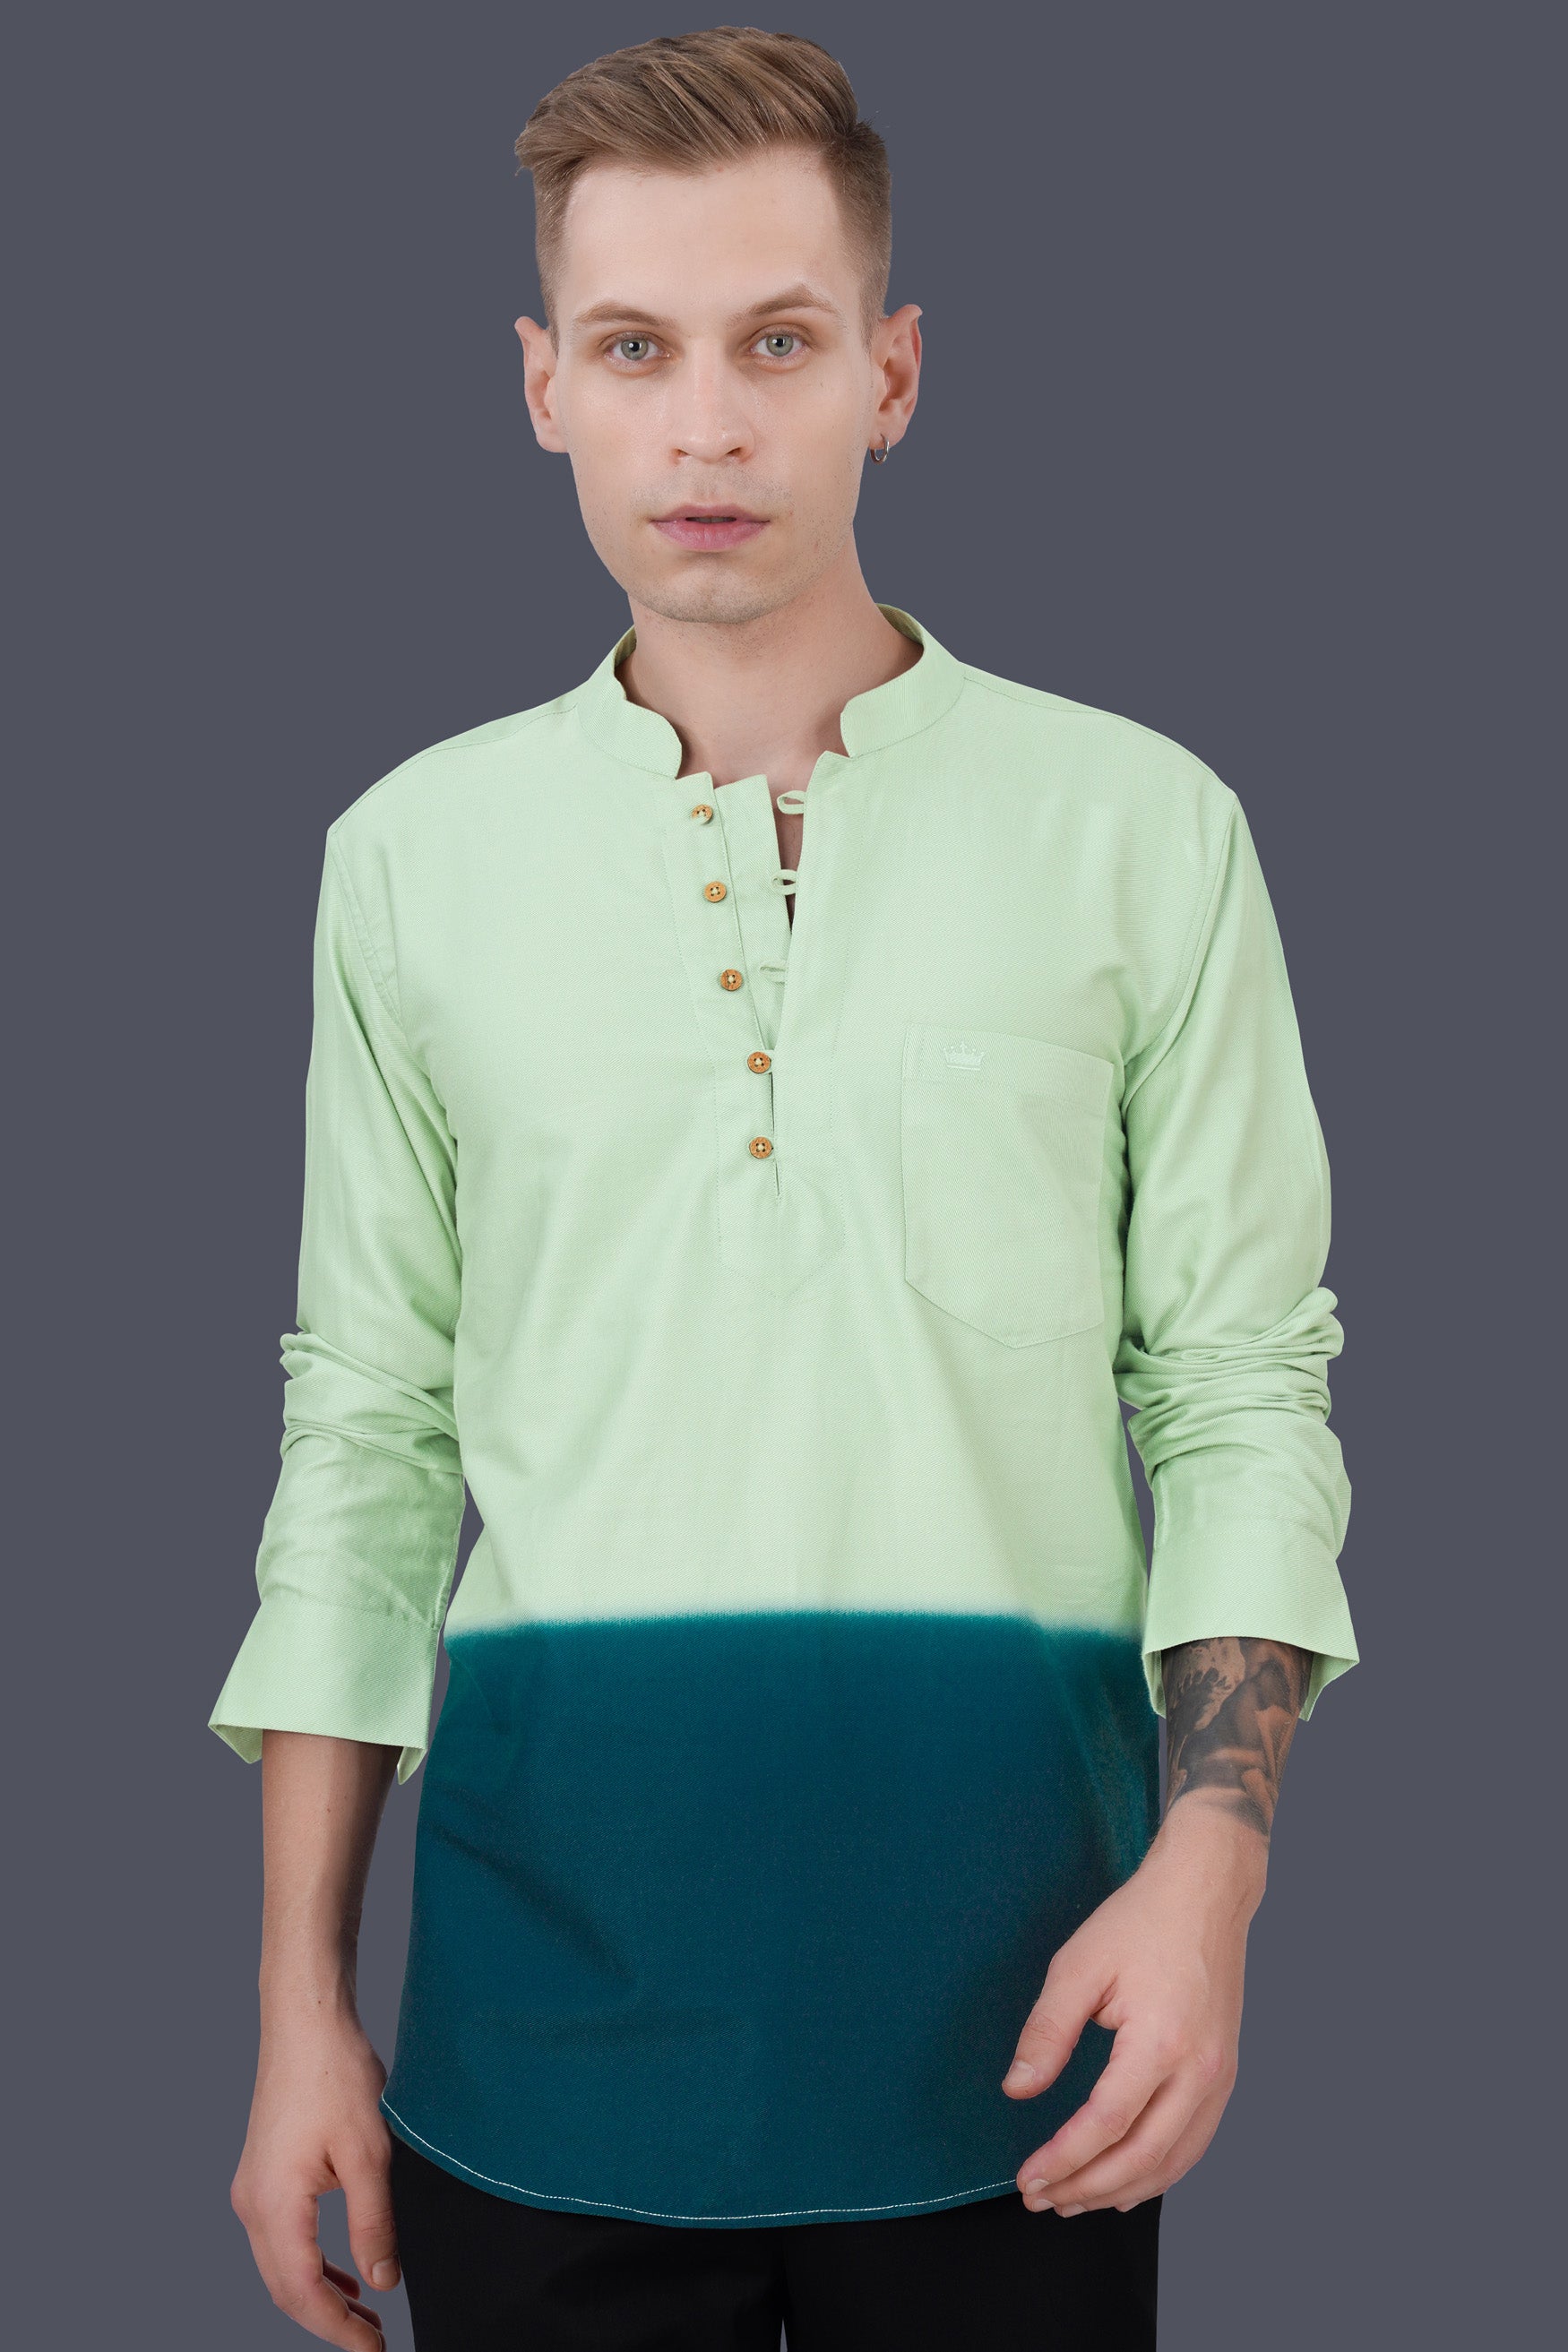 Envy Green and Prussian Blue Twill Premium Cotton Kurta Shirt 11757-KS-38, 11757-KS-H-38, 11757-KS-39, 11757-KS-H-39, 11757-KS-40, 11757-KS-H-40, 11757-KS-42, 11757-KS-H-42, 11757-KS-44, 11757-KS-H-44, 11757-KS-46, 11757-KS-H-46, 11757-KS-48, 11757-KS-H-48, 11757-KS-50, 11757-KS-H-50, 11757-KS-52, 11757-KS-H-52